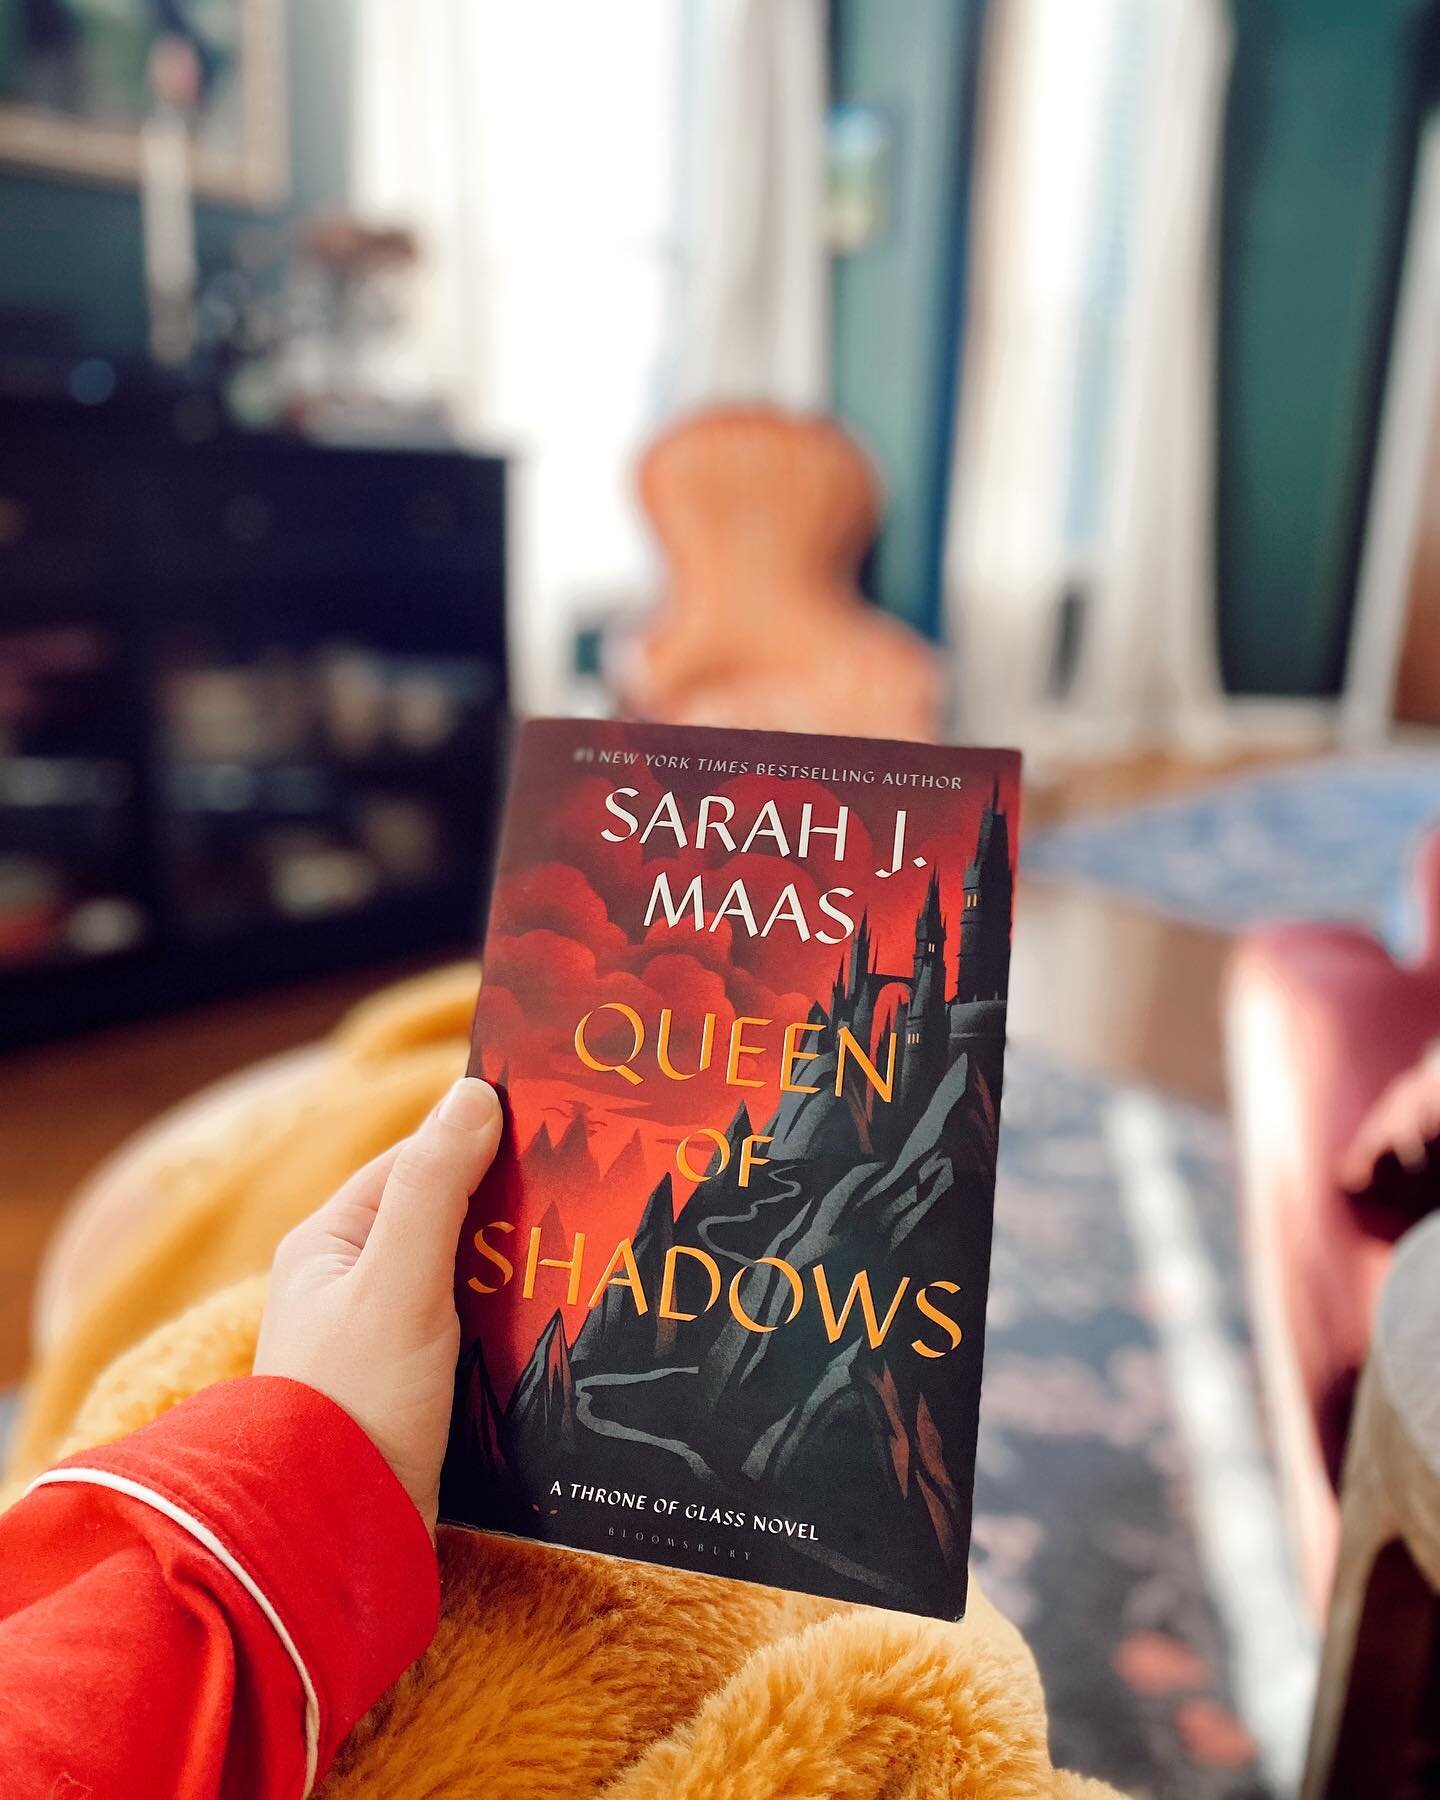 Every time I start complaining about how long it&rsquo;s taking me to get through this series the ending comes and just takes my breath away. How. Does. She. Do. It?! 

I wanted to stand up and clap after I finished Queen of Shadows. BRAVO.